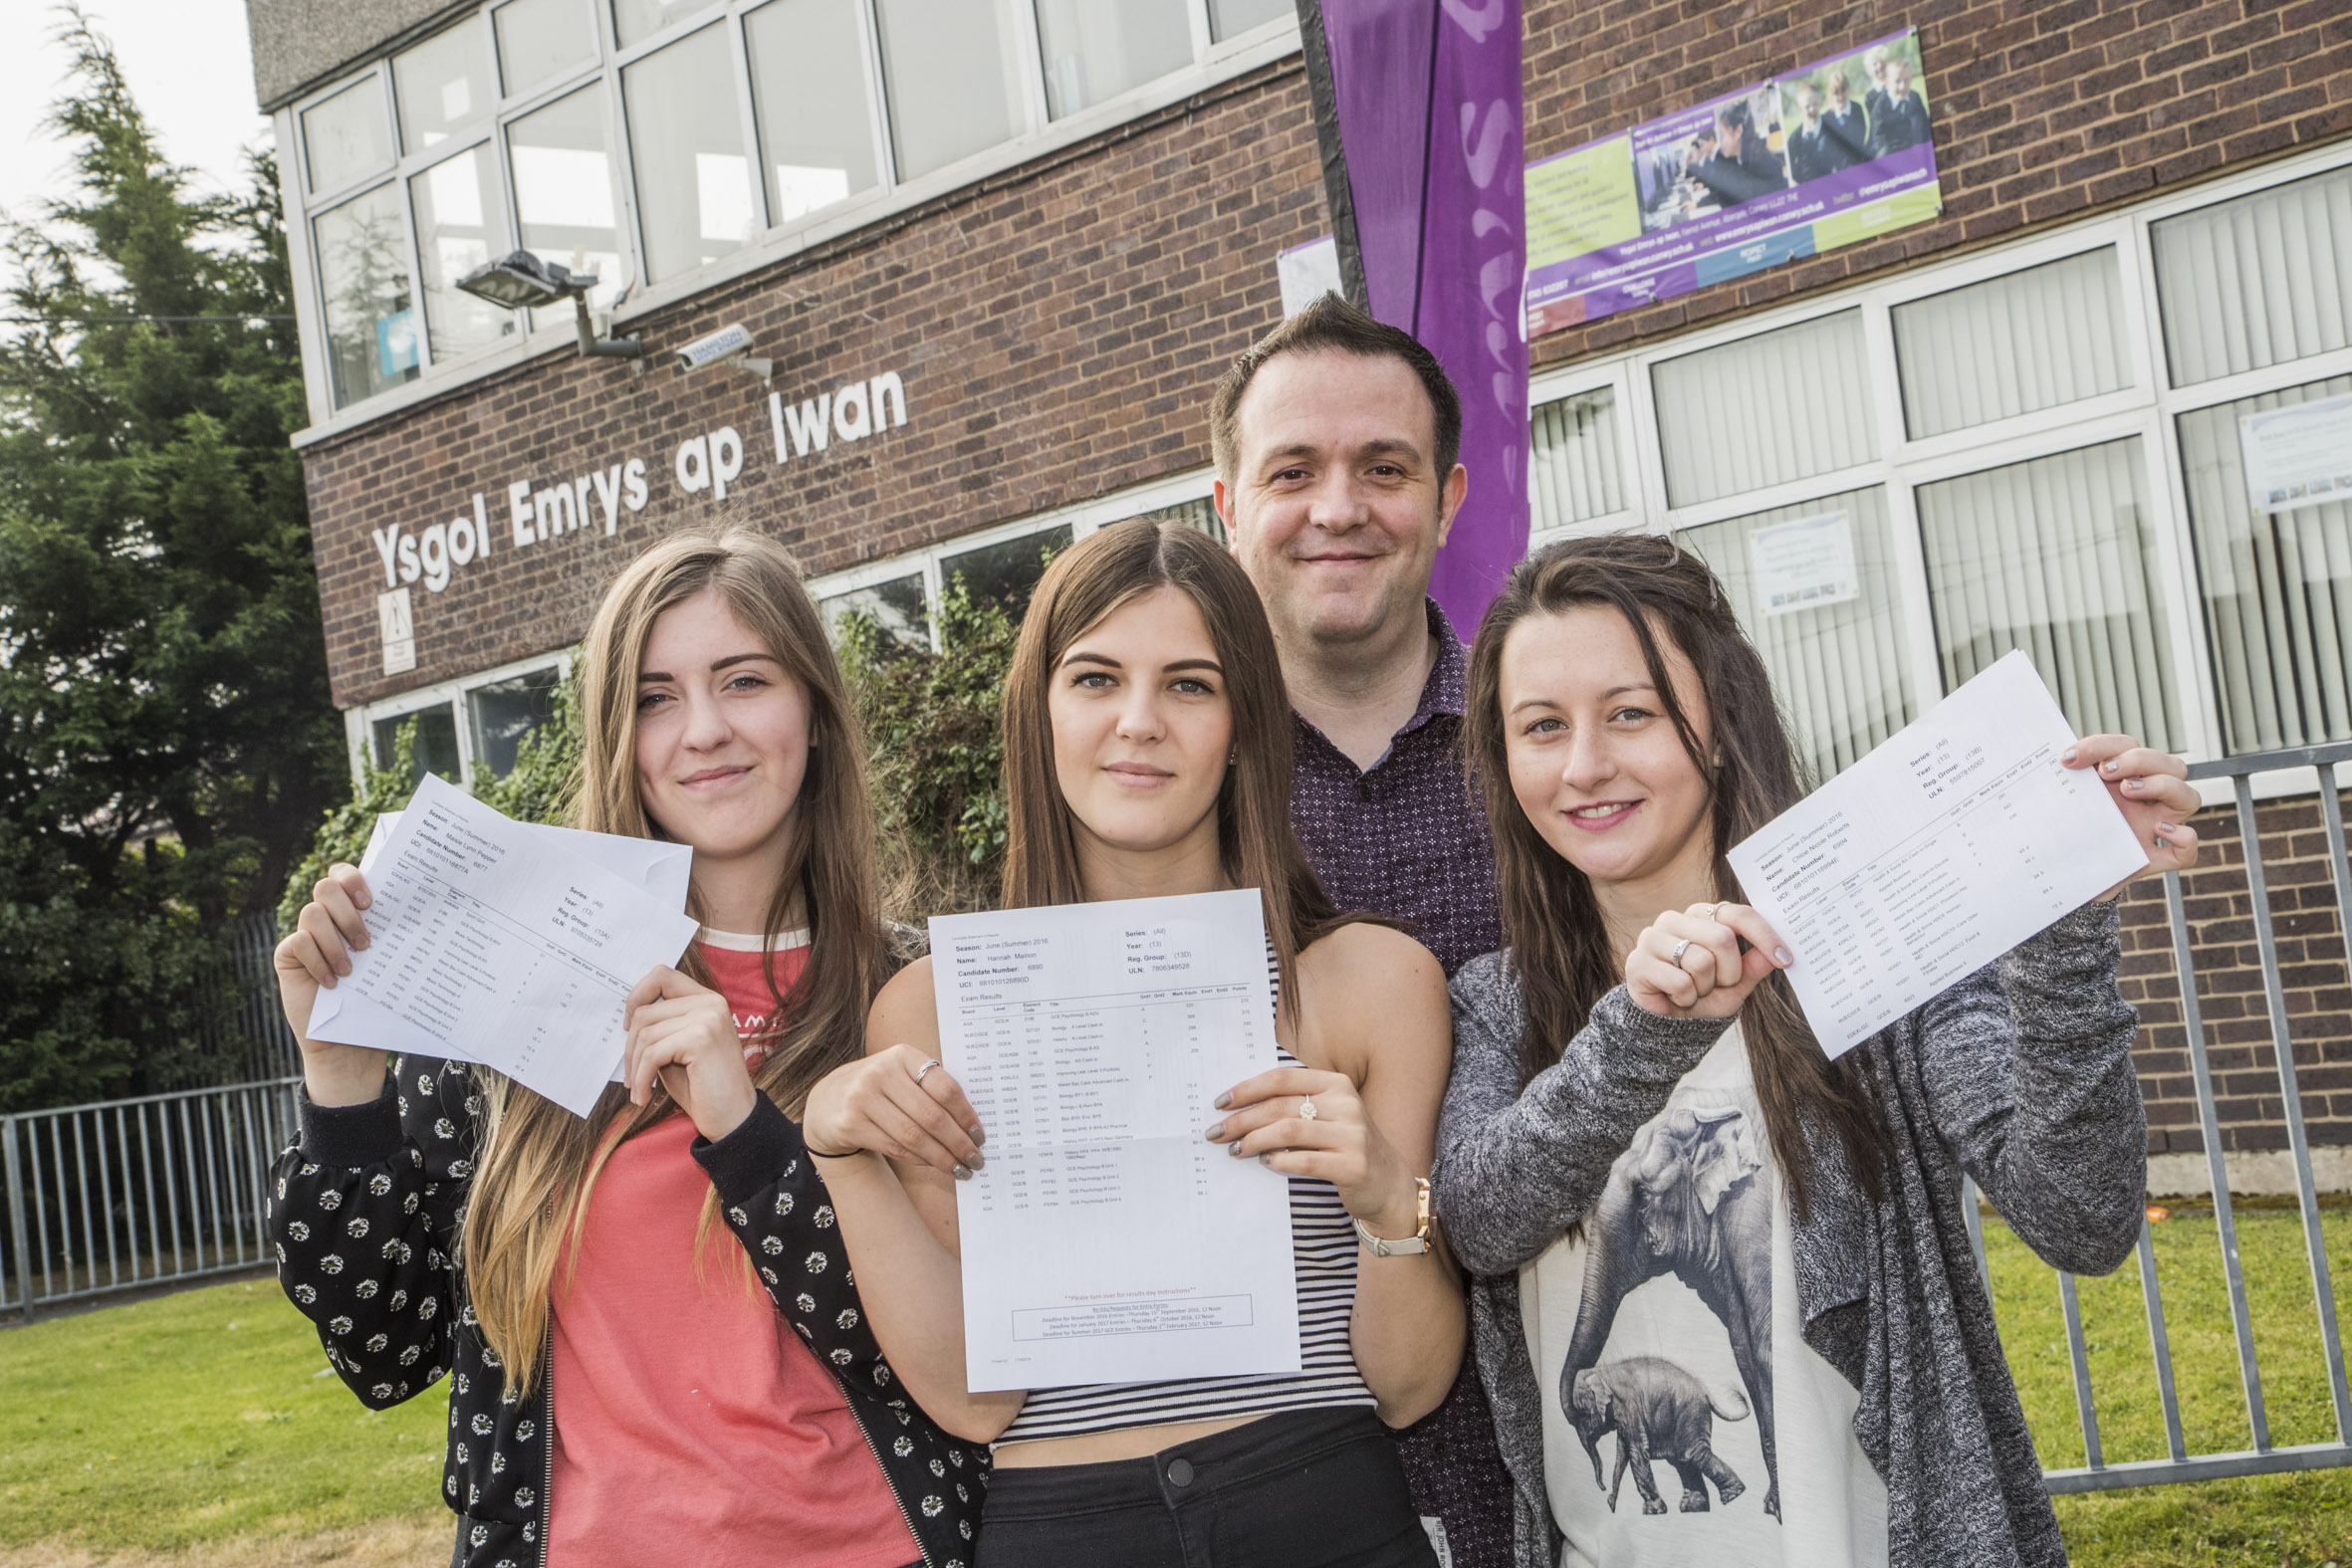 Ysgol Emrys ap Iwan celebrates “best ever” A level results with 100 per cent pass rate